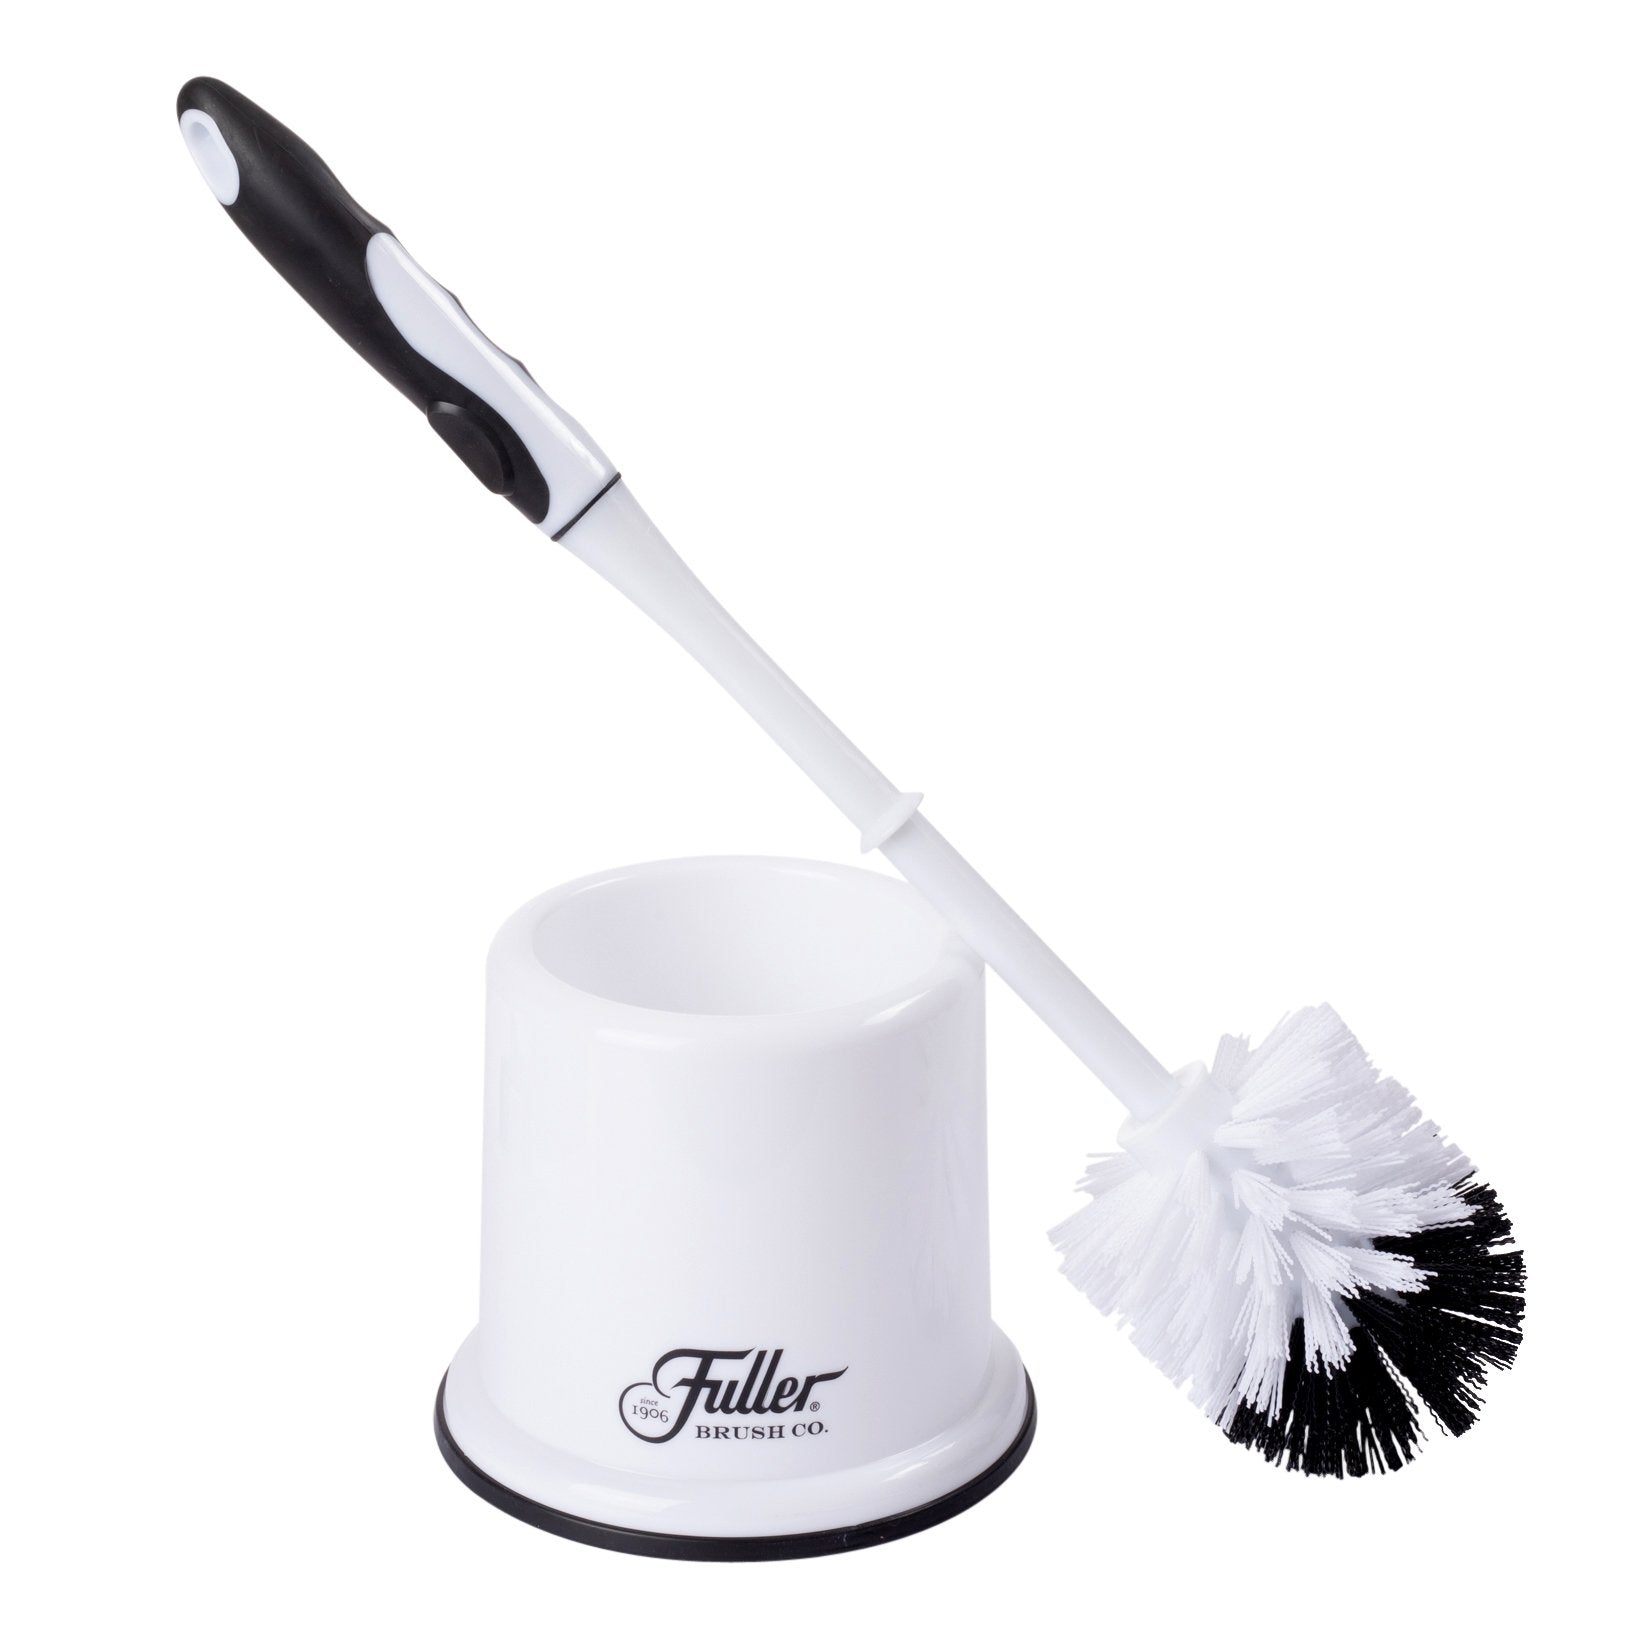 Premium Bowl Brush in Caddy Set-Other Cleaning Supplies-Fuller Brush Company